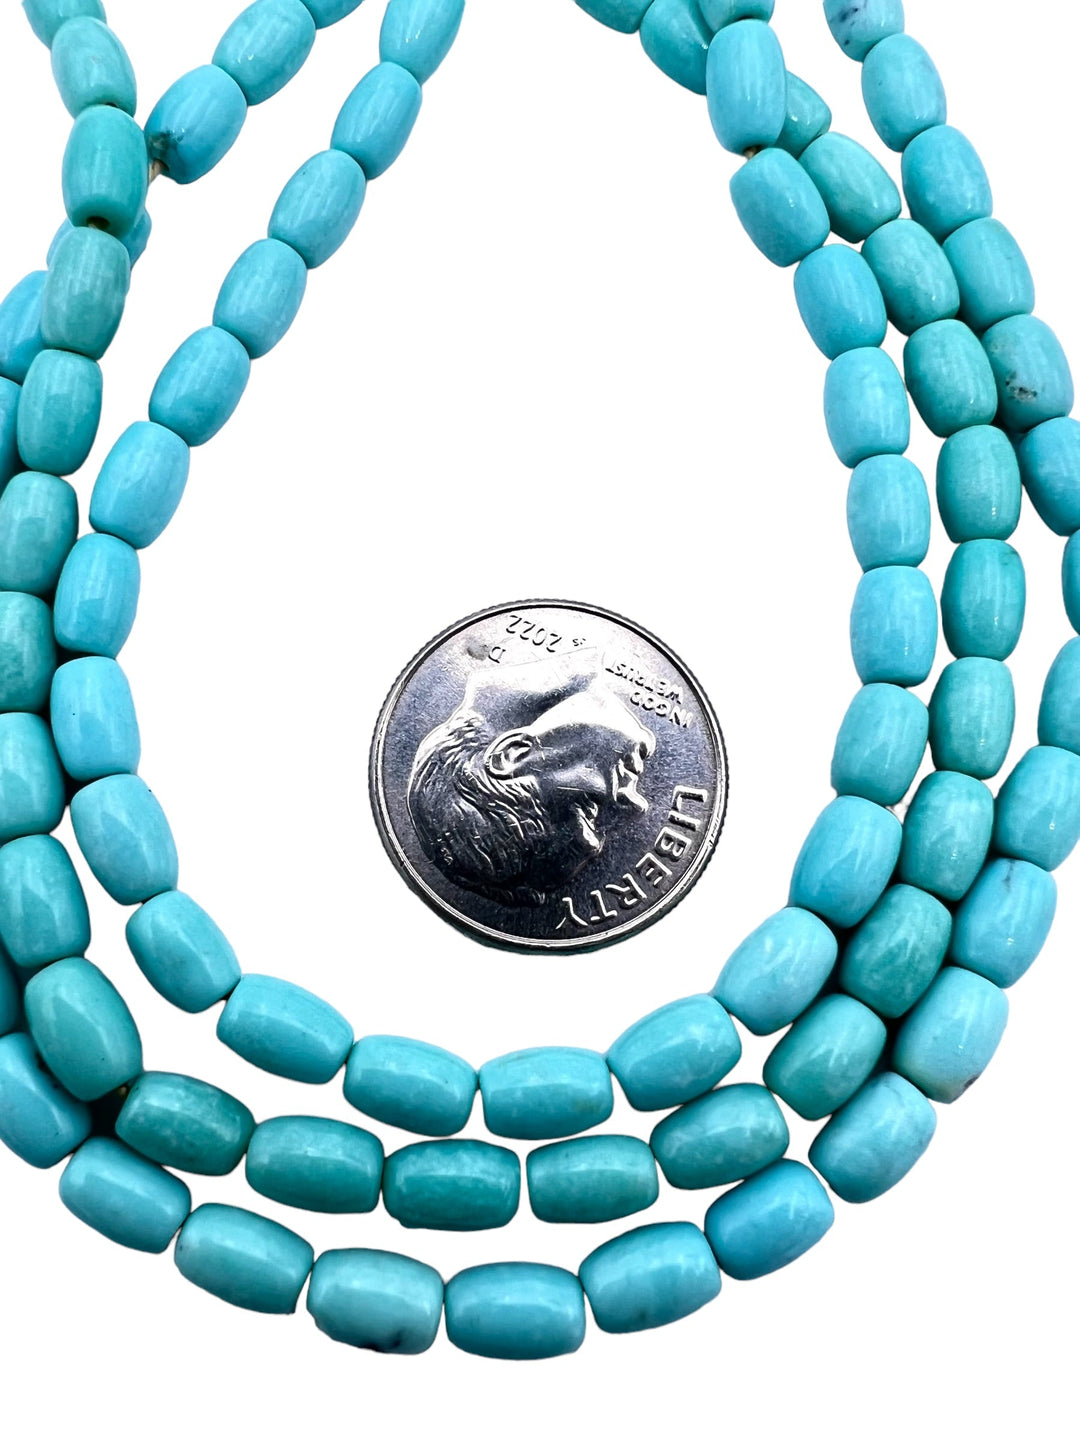 Natural Campitos (Mex) Turquoise 4x6mm Barrel Beads (9 inch Strand)